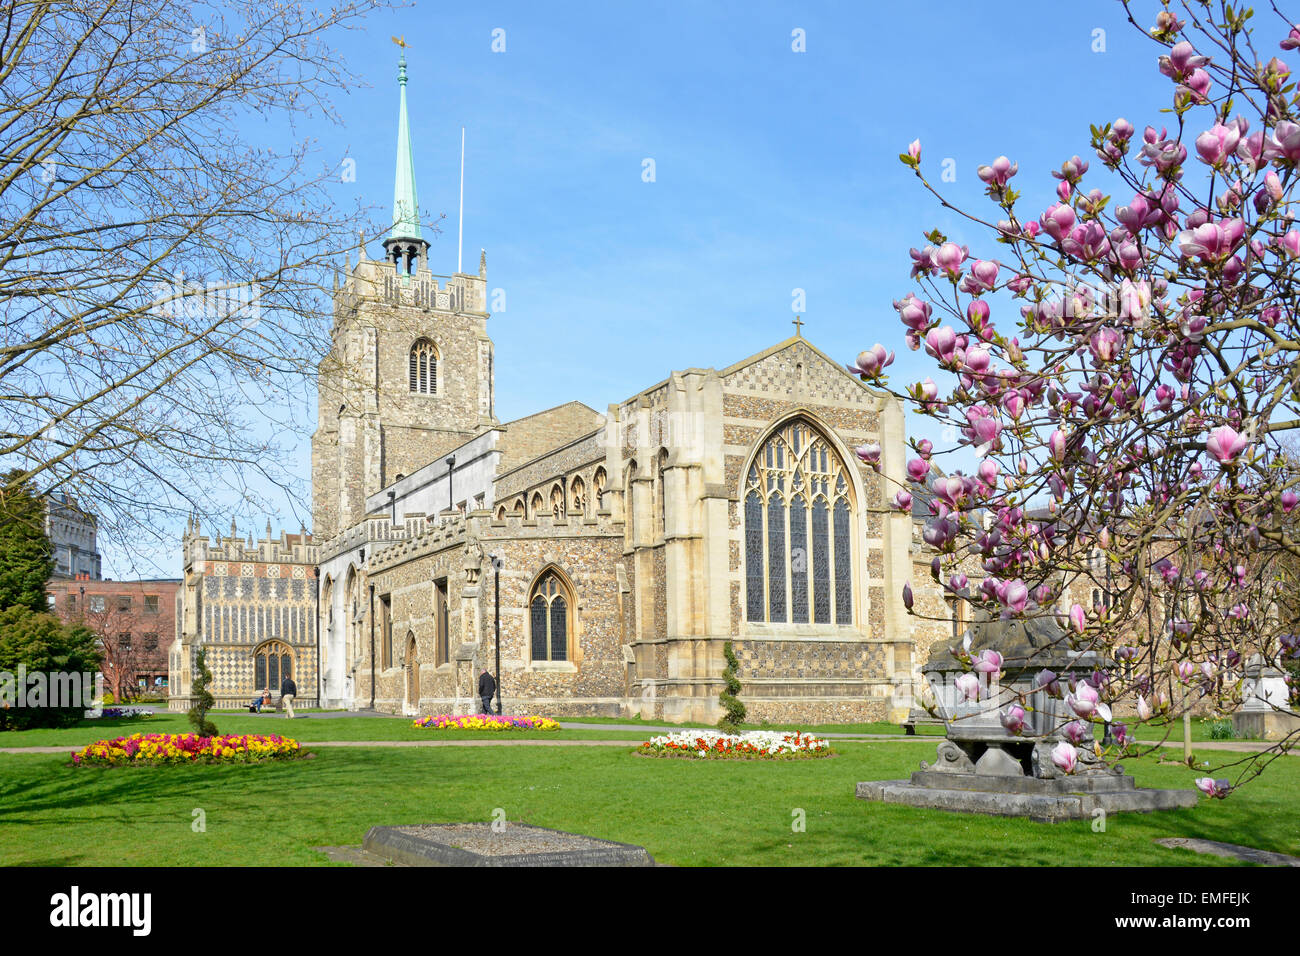 City of Chelmsford Gothic style Anglican Cathedral church tower & green copper spire stone sarcophagus in churchyard behind Magnolia Essex England UK Stock Photo